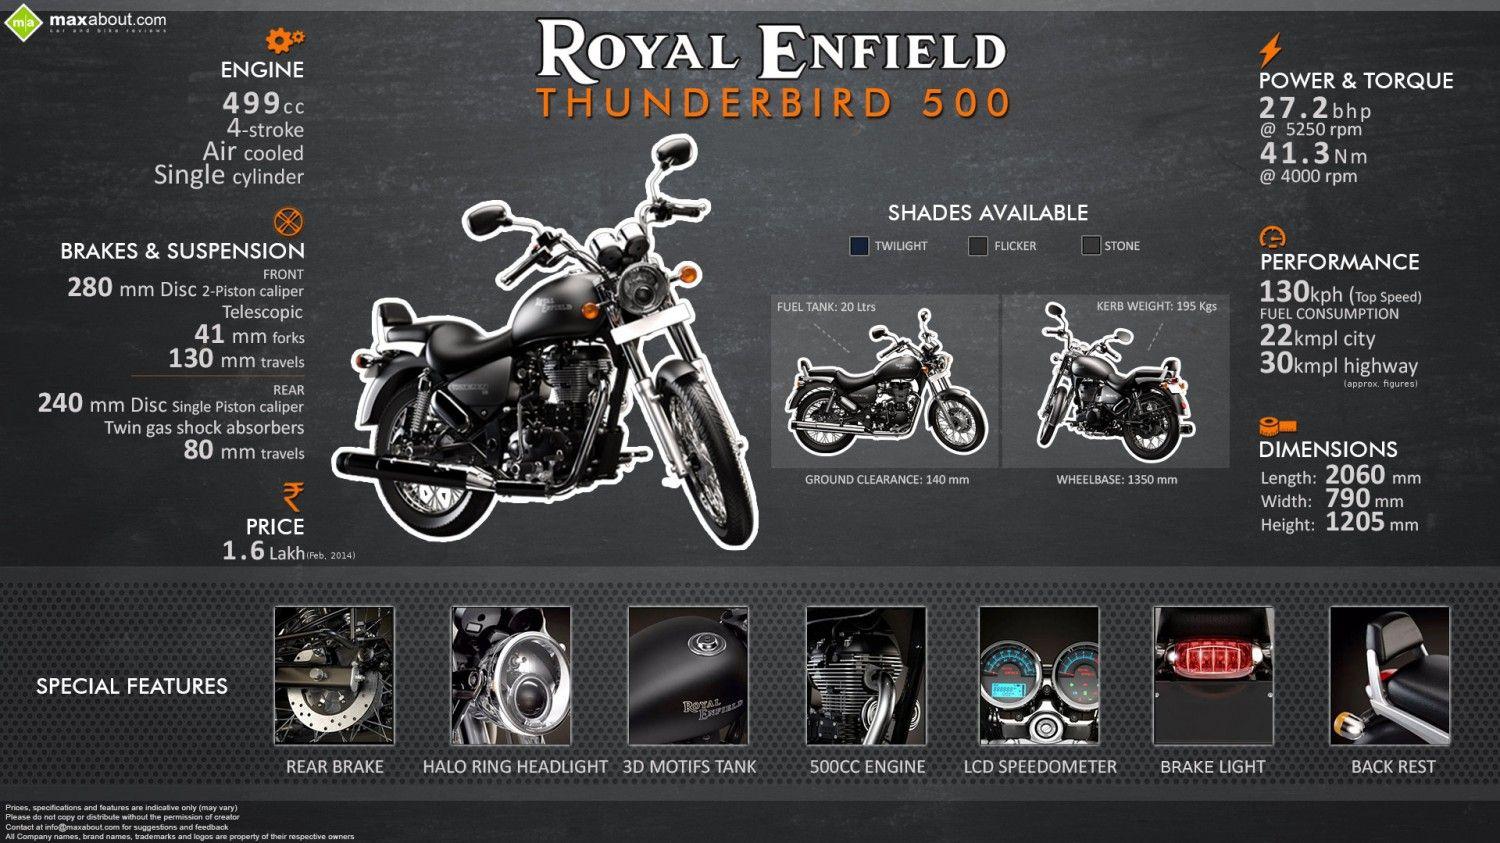 Royal Enfield Thunderbird 500: All You Need to Know